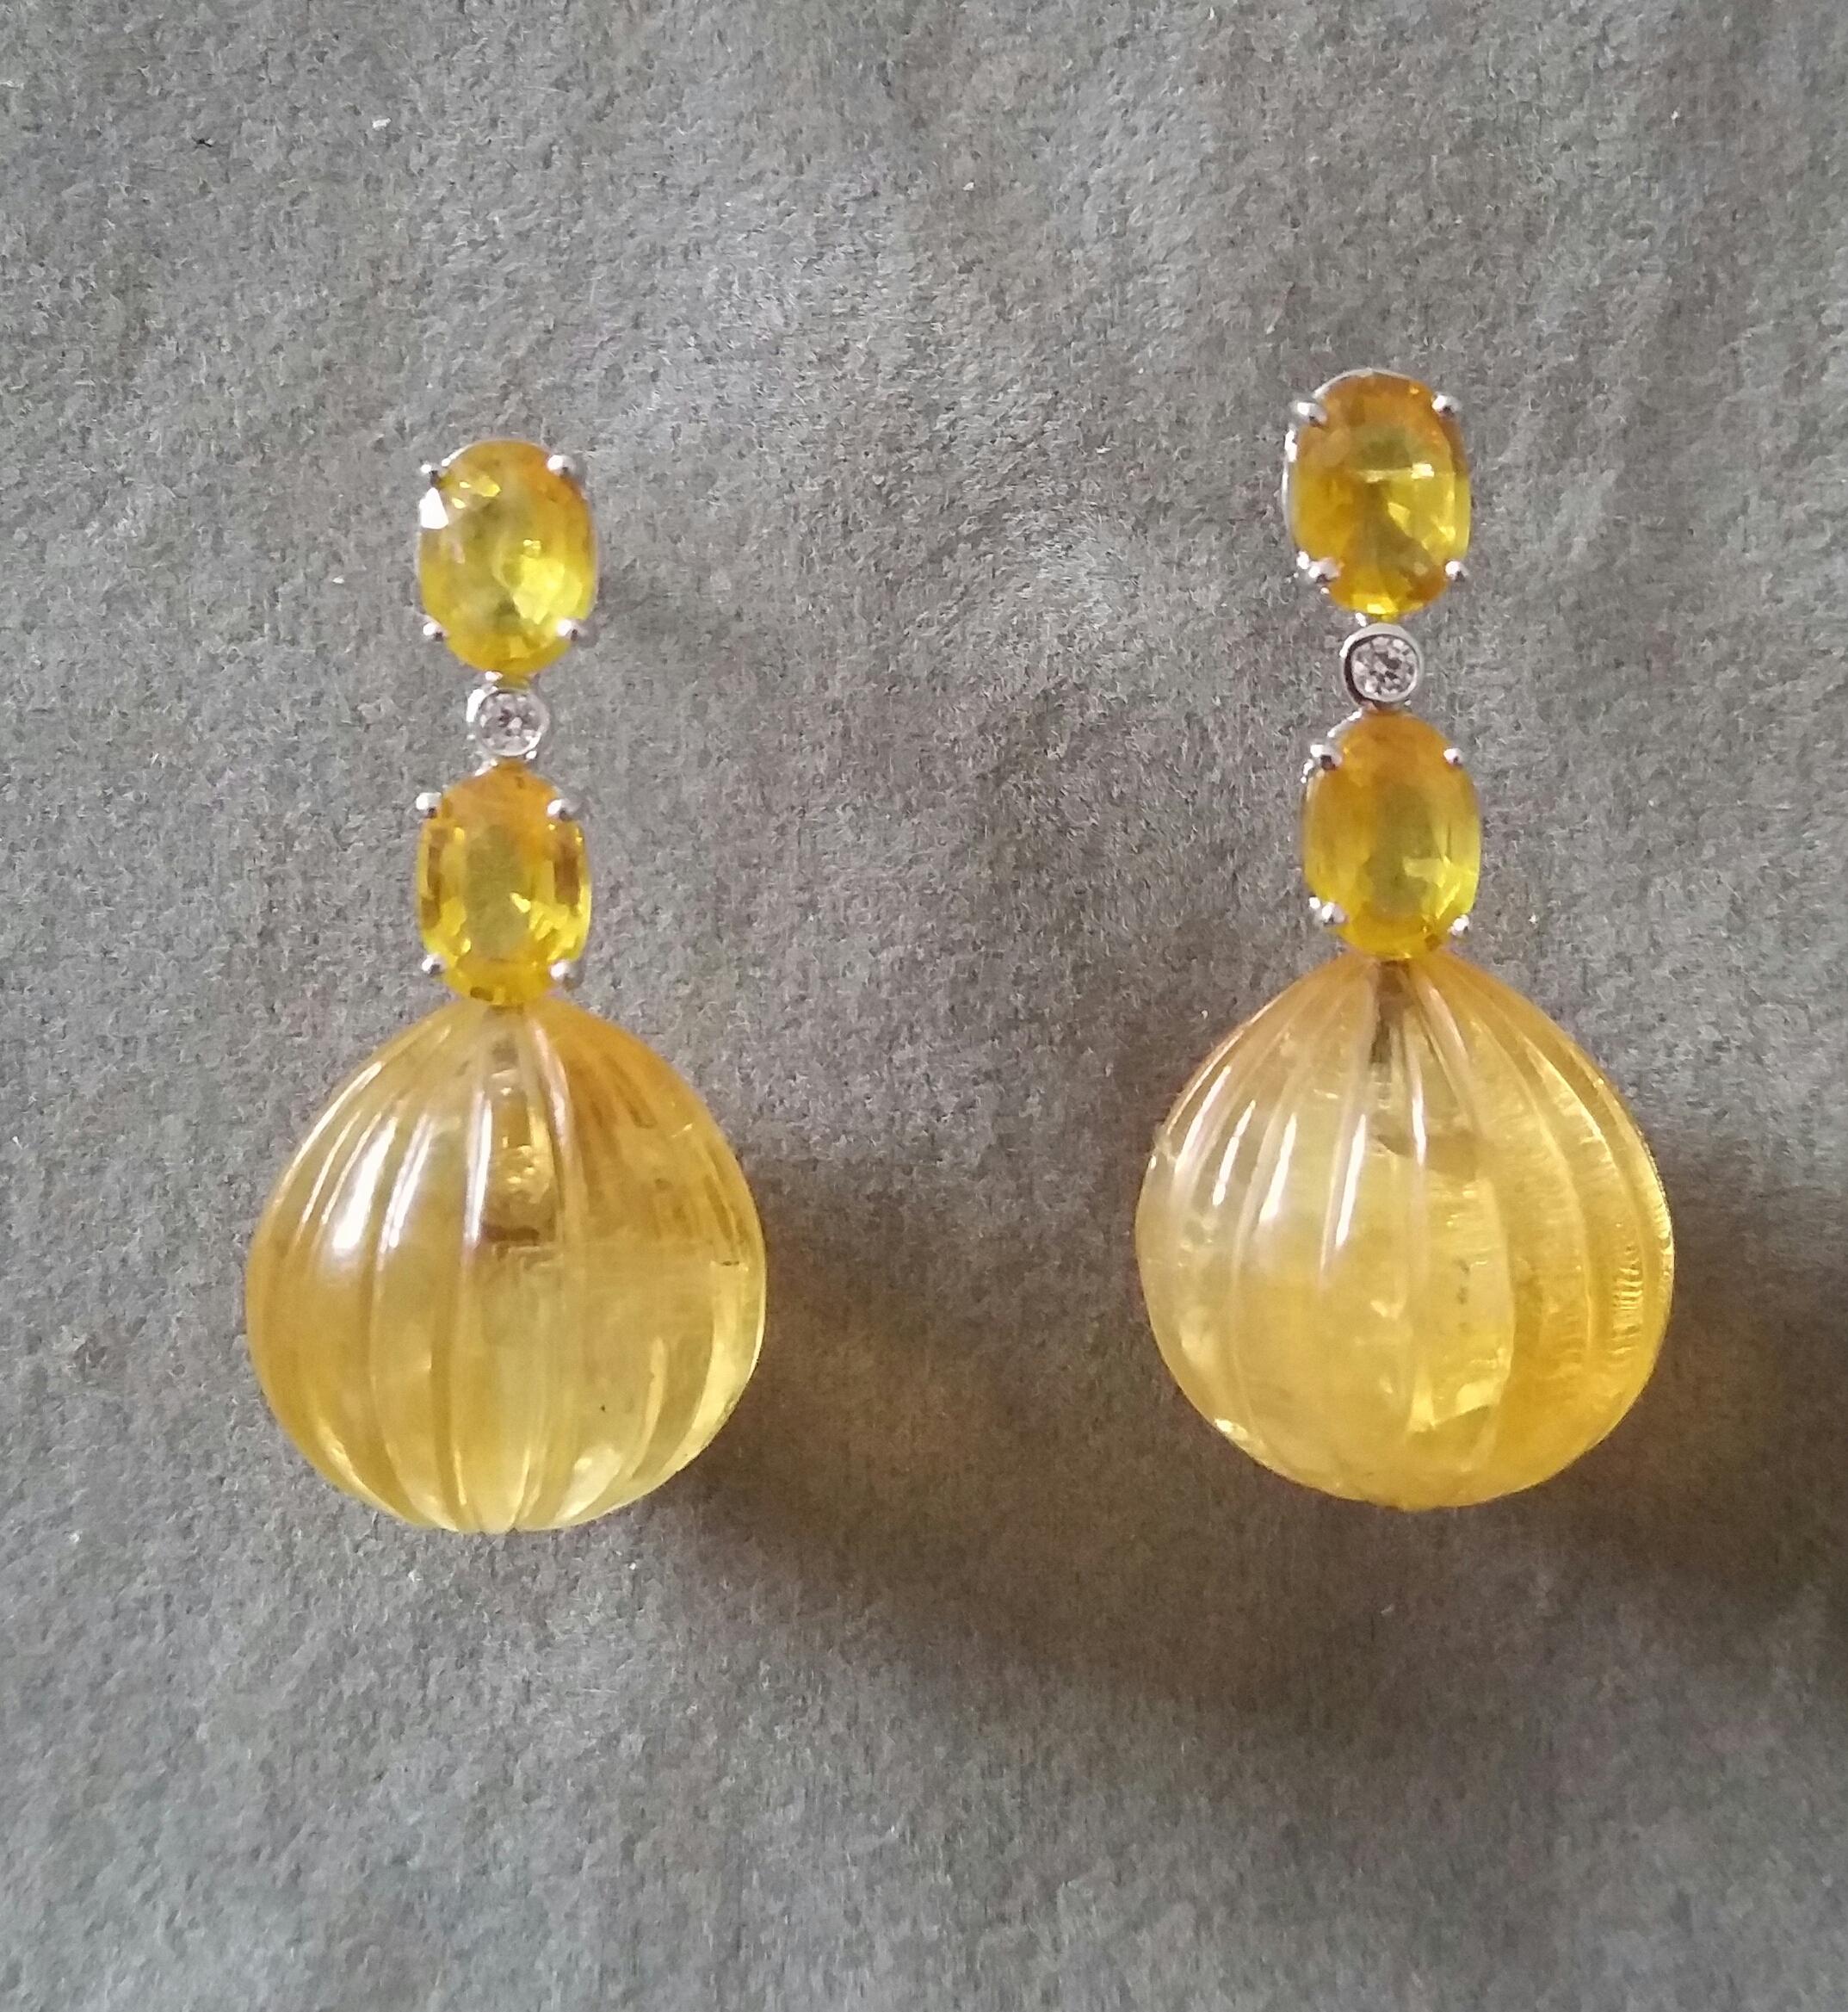 Elegant and completely handmade Earrings consisting of an upper part of 2 faceted oval shape  Yellow Sapphires of 5 mm x 7 mm set together in 14 Kt white gold with a  small diamond in the middle, at the bottom 2  Carved Round Citrine Drops measuring